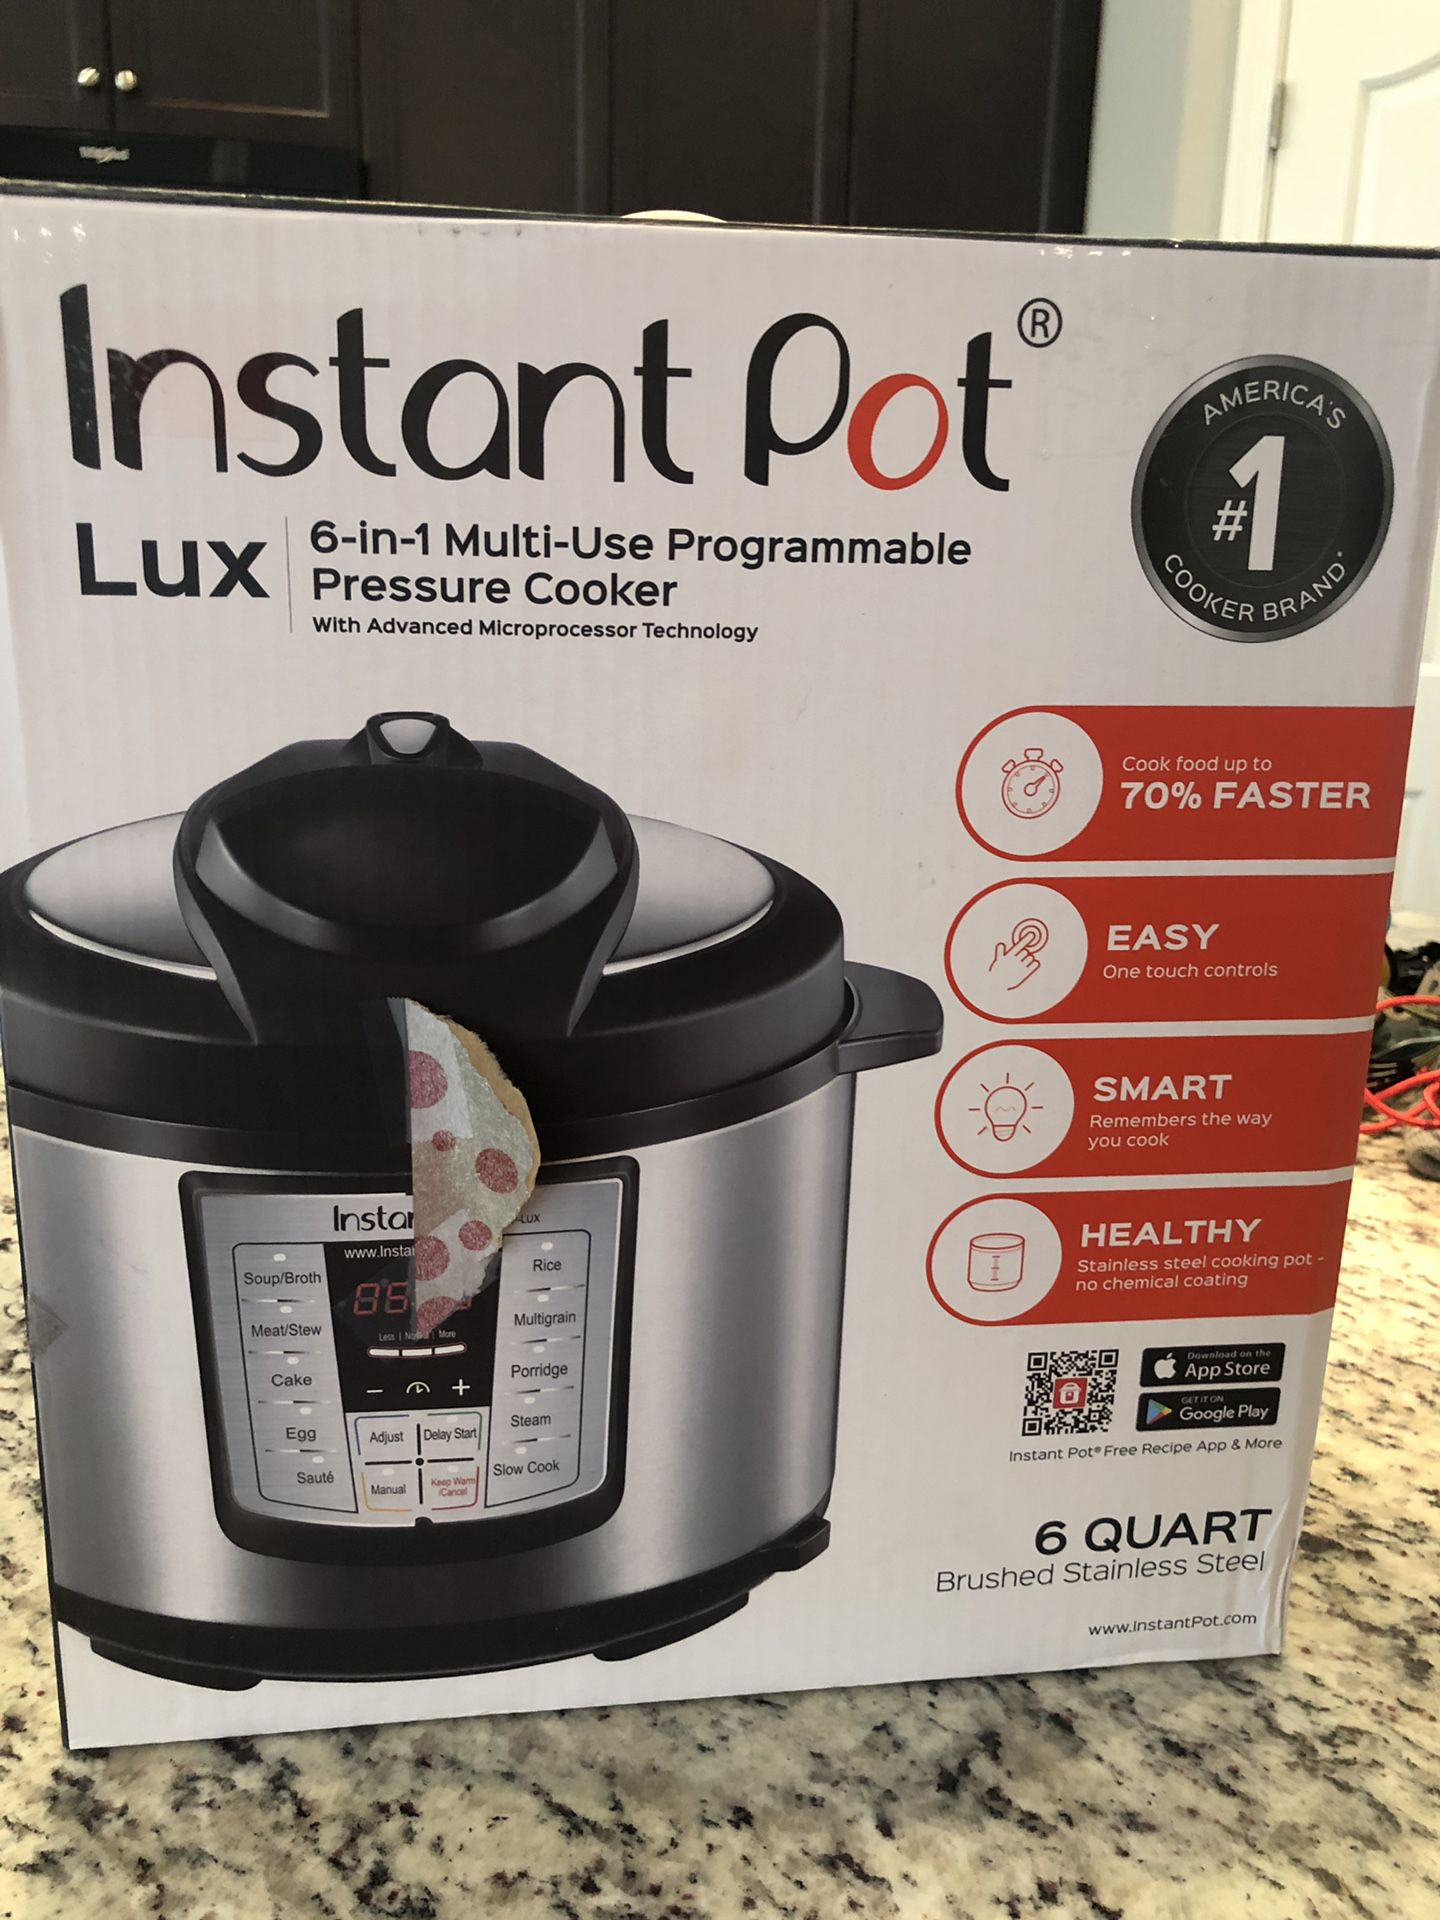 Instant Pot LUX60 V3 6 Qt 6-in-1 Muti-Use Programmable Pressure Cooker, Silver